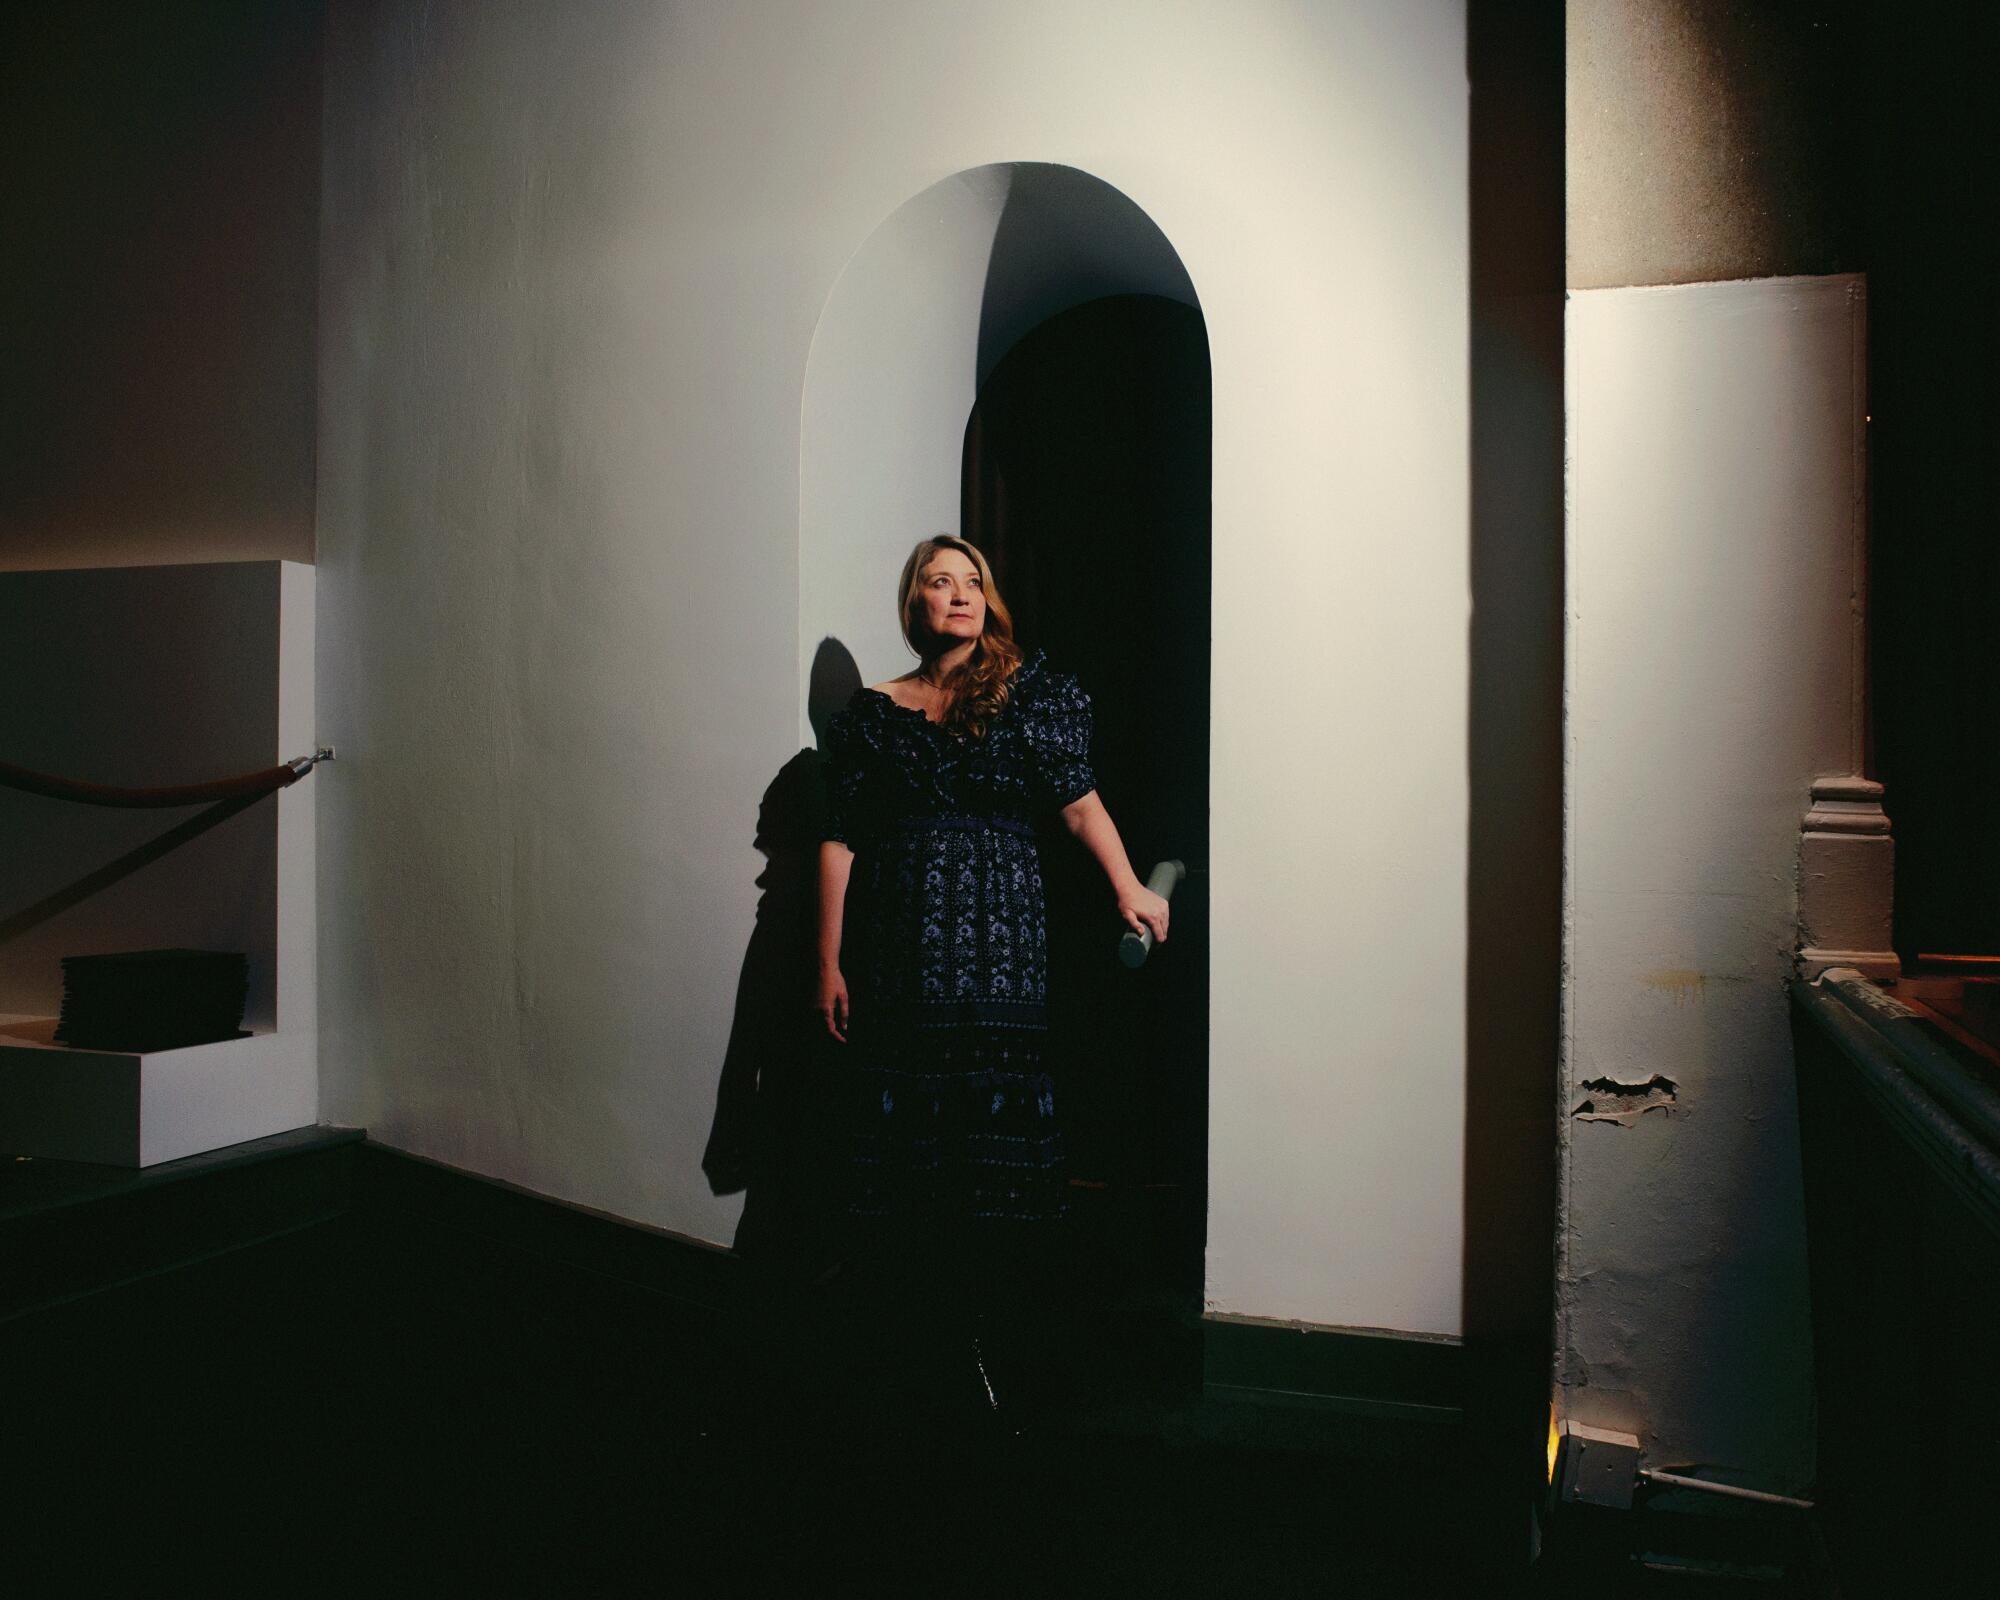 A woman poses under an arched doorway holding a handrail